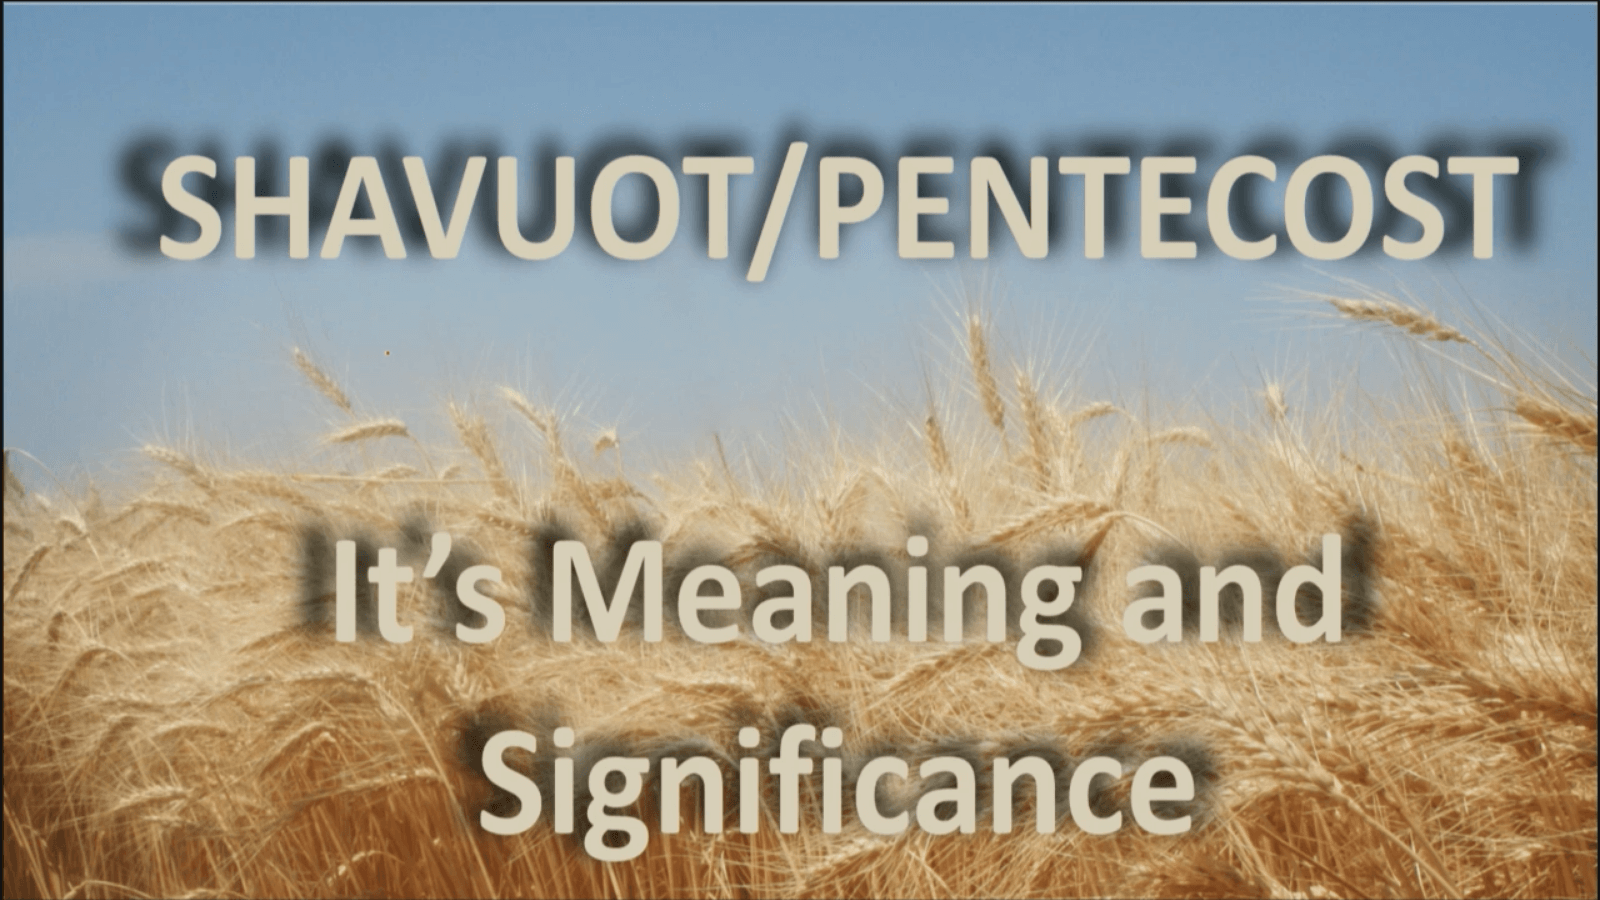 Shavuot/Pentecost: Its meaning and significance (2016)